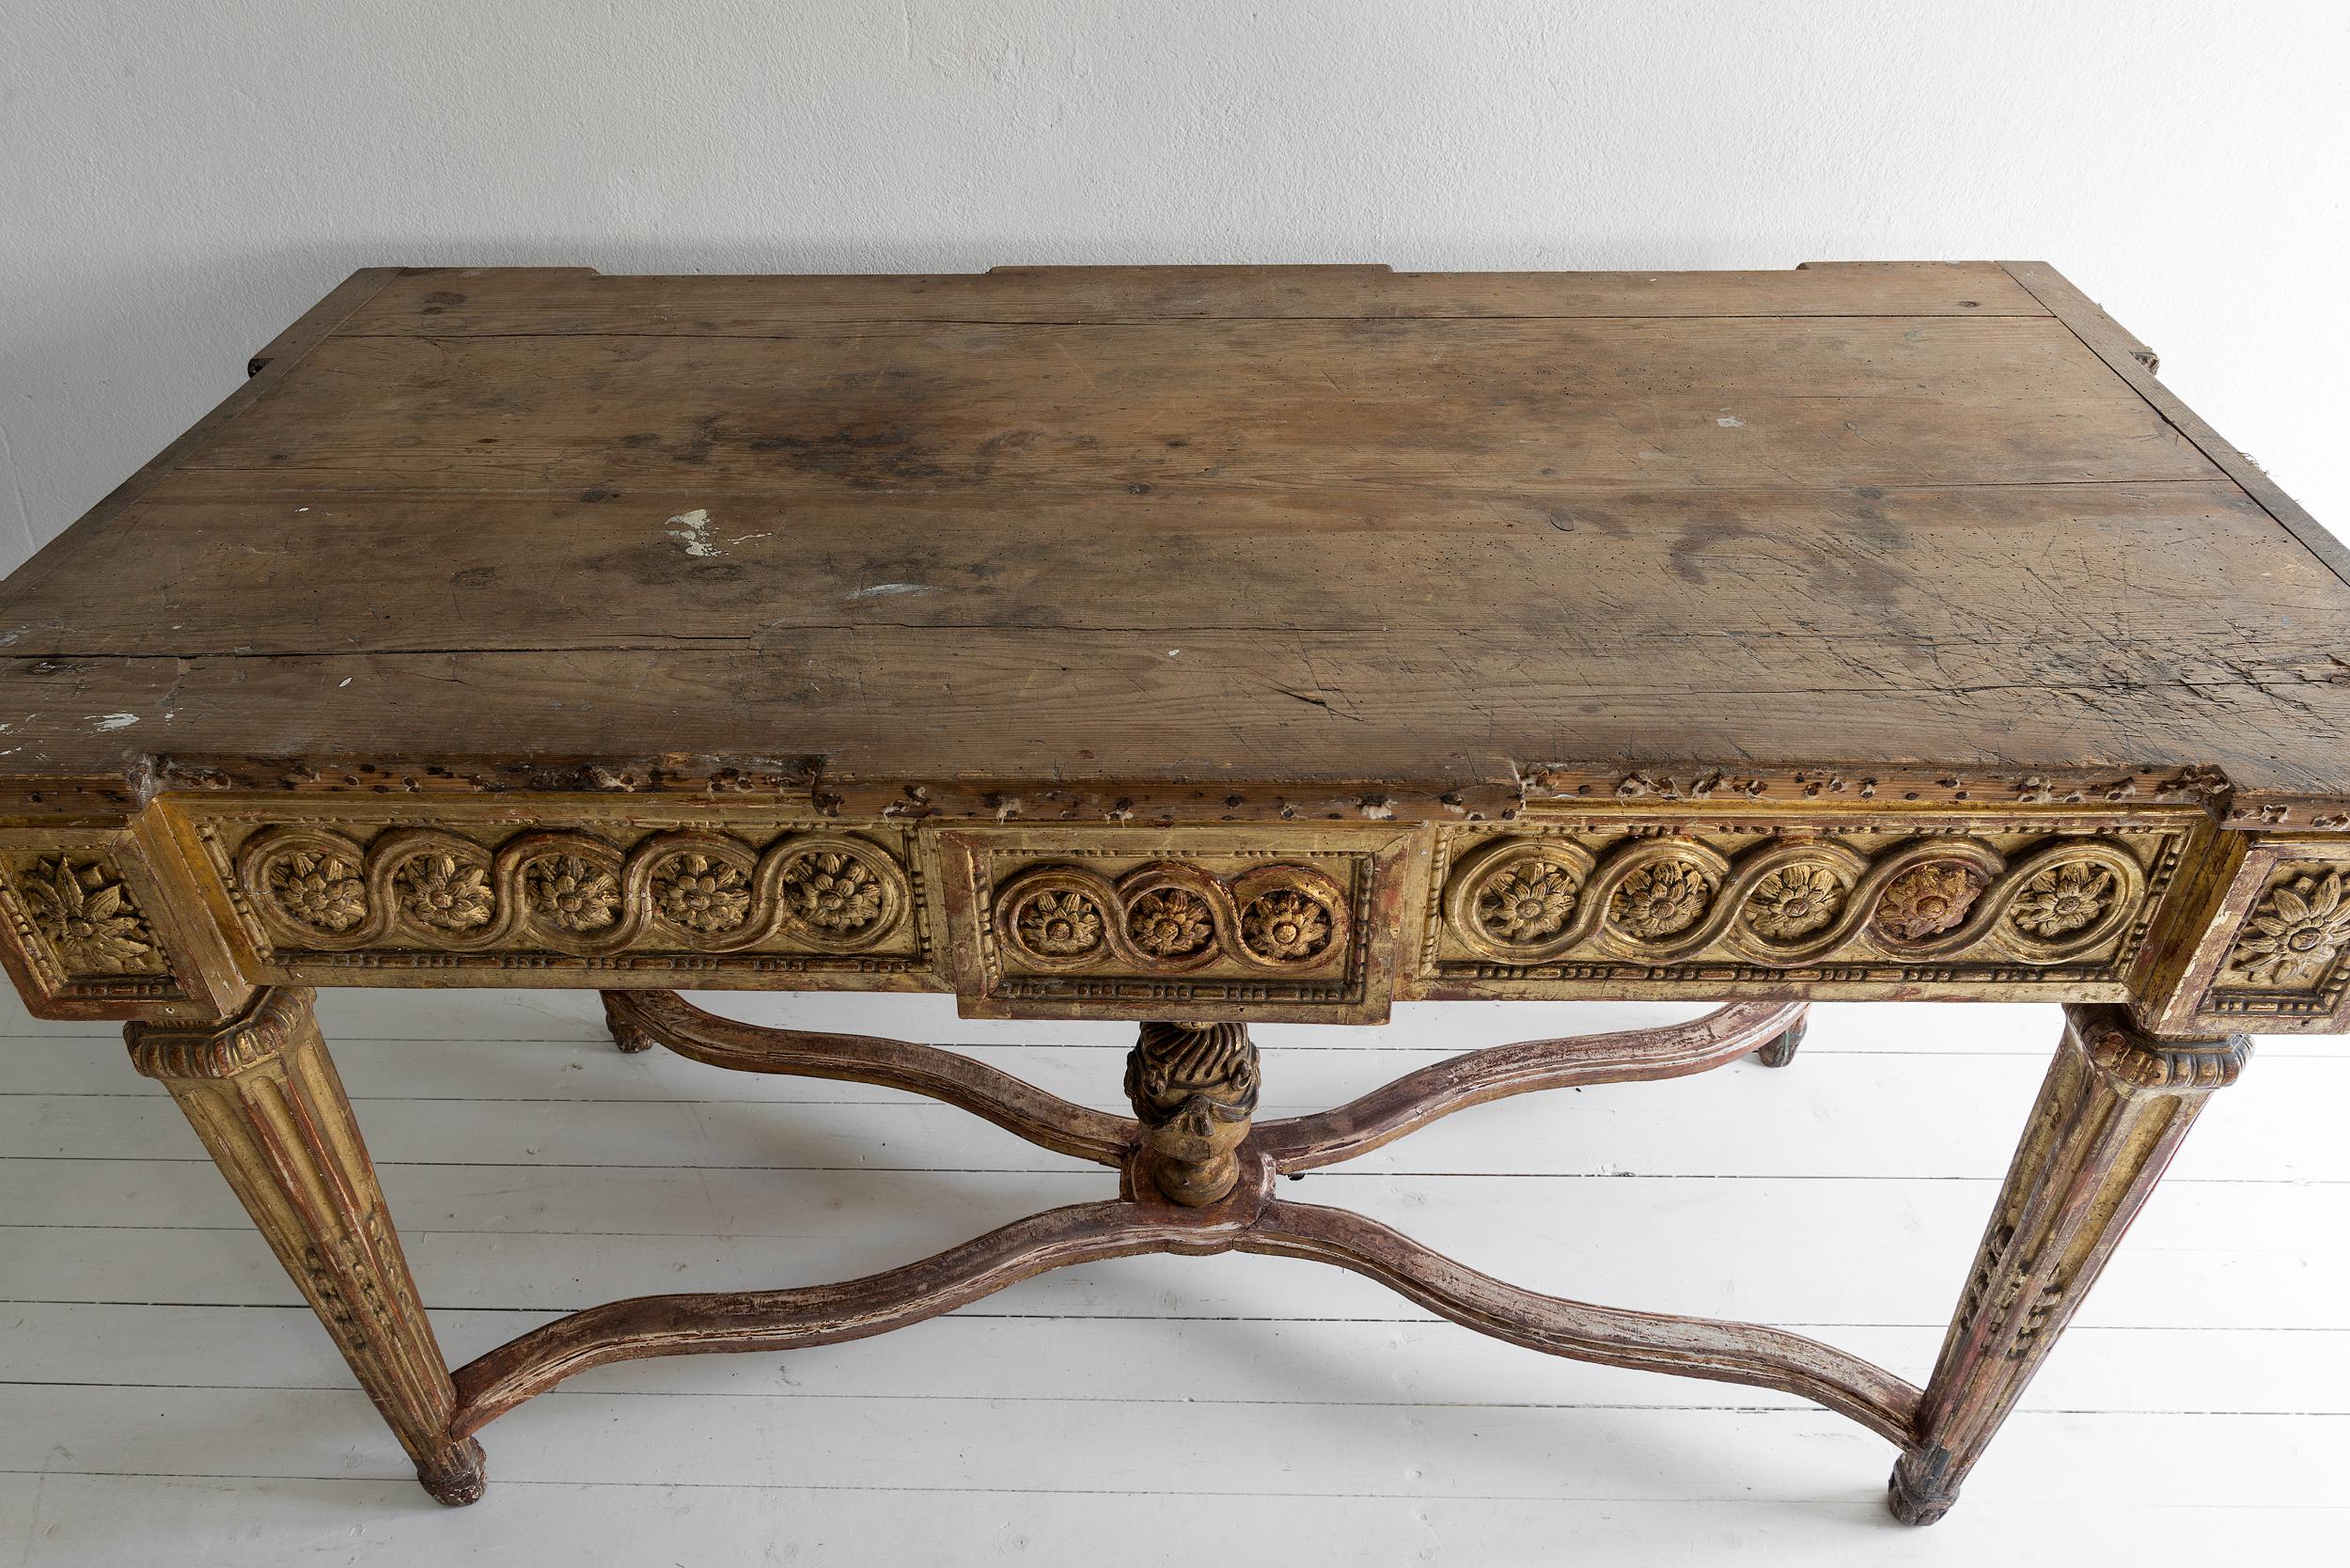 Hand-Carved Outstanding Neoclassical Salon Table of Imposing Proportions, circa 1790